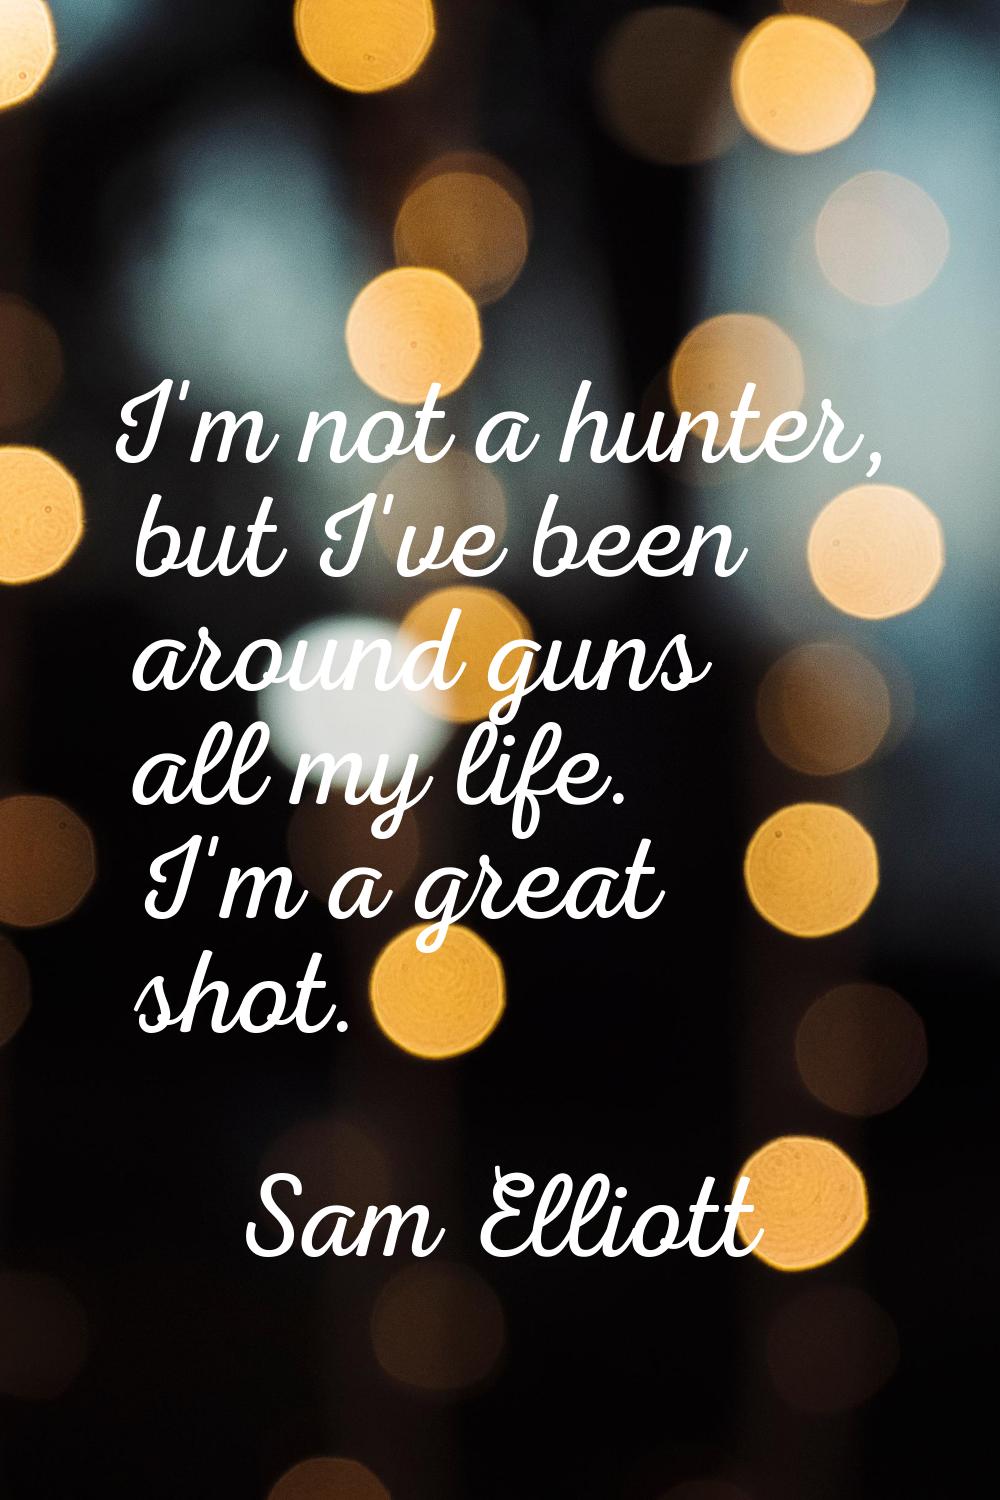 I'm not a hunter, but I've been around guns all my life. I'm a great shot.